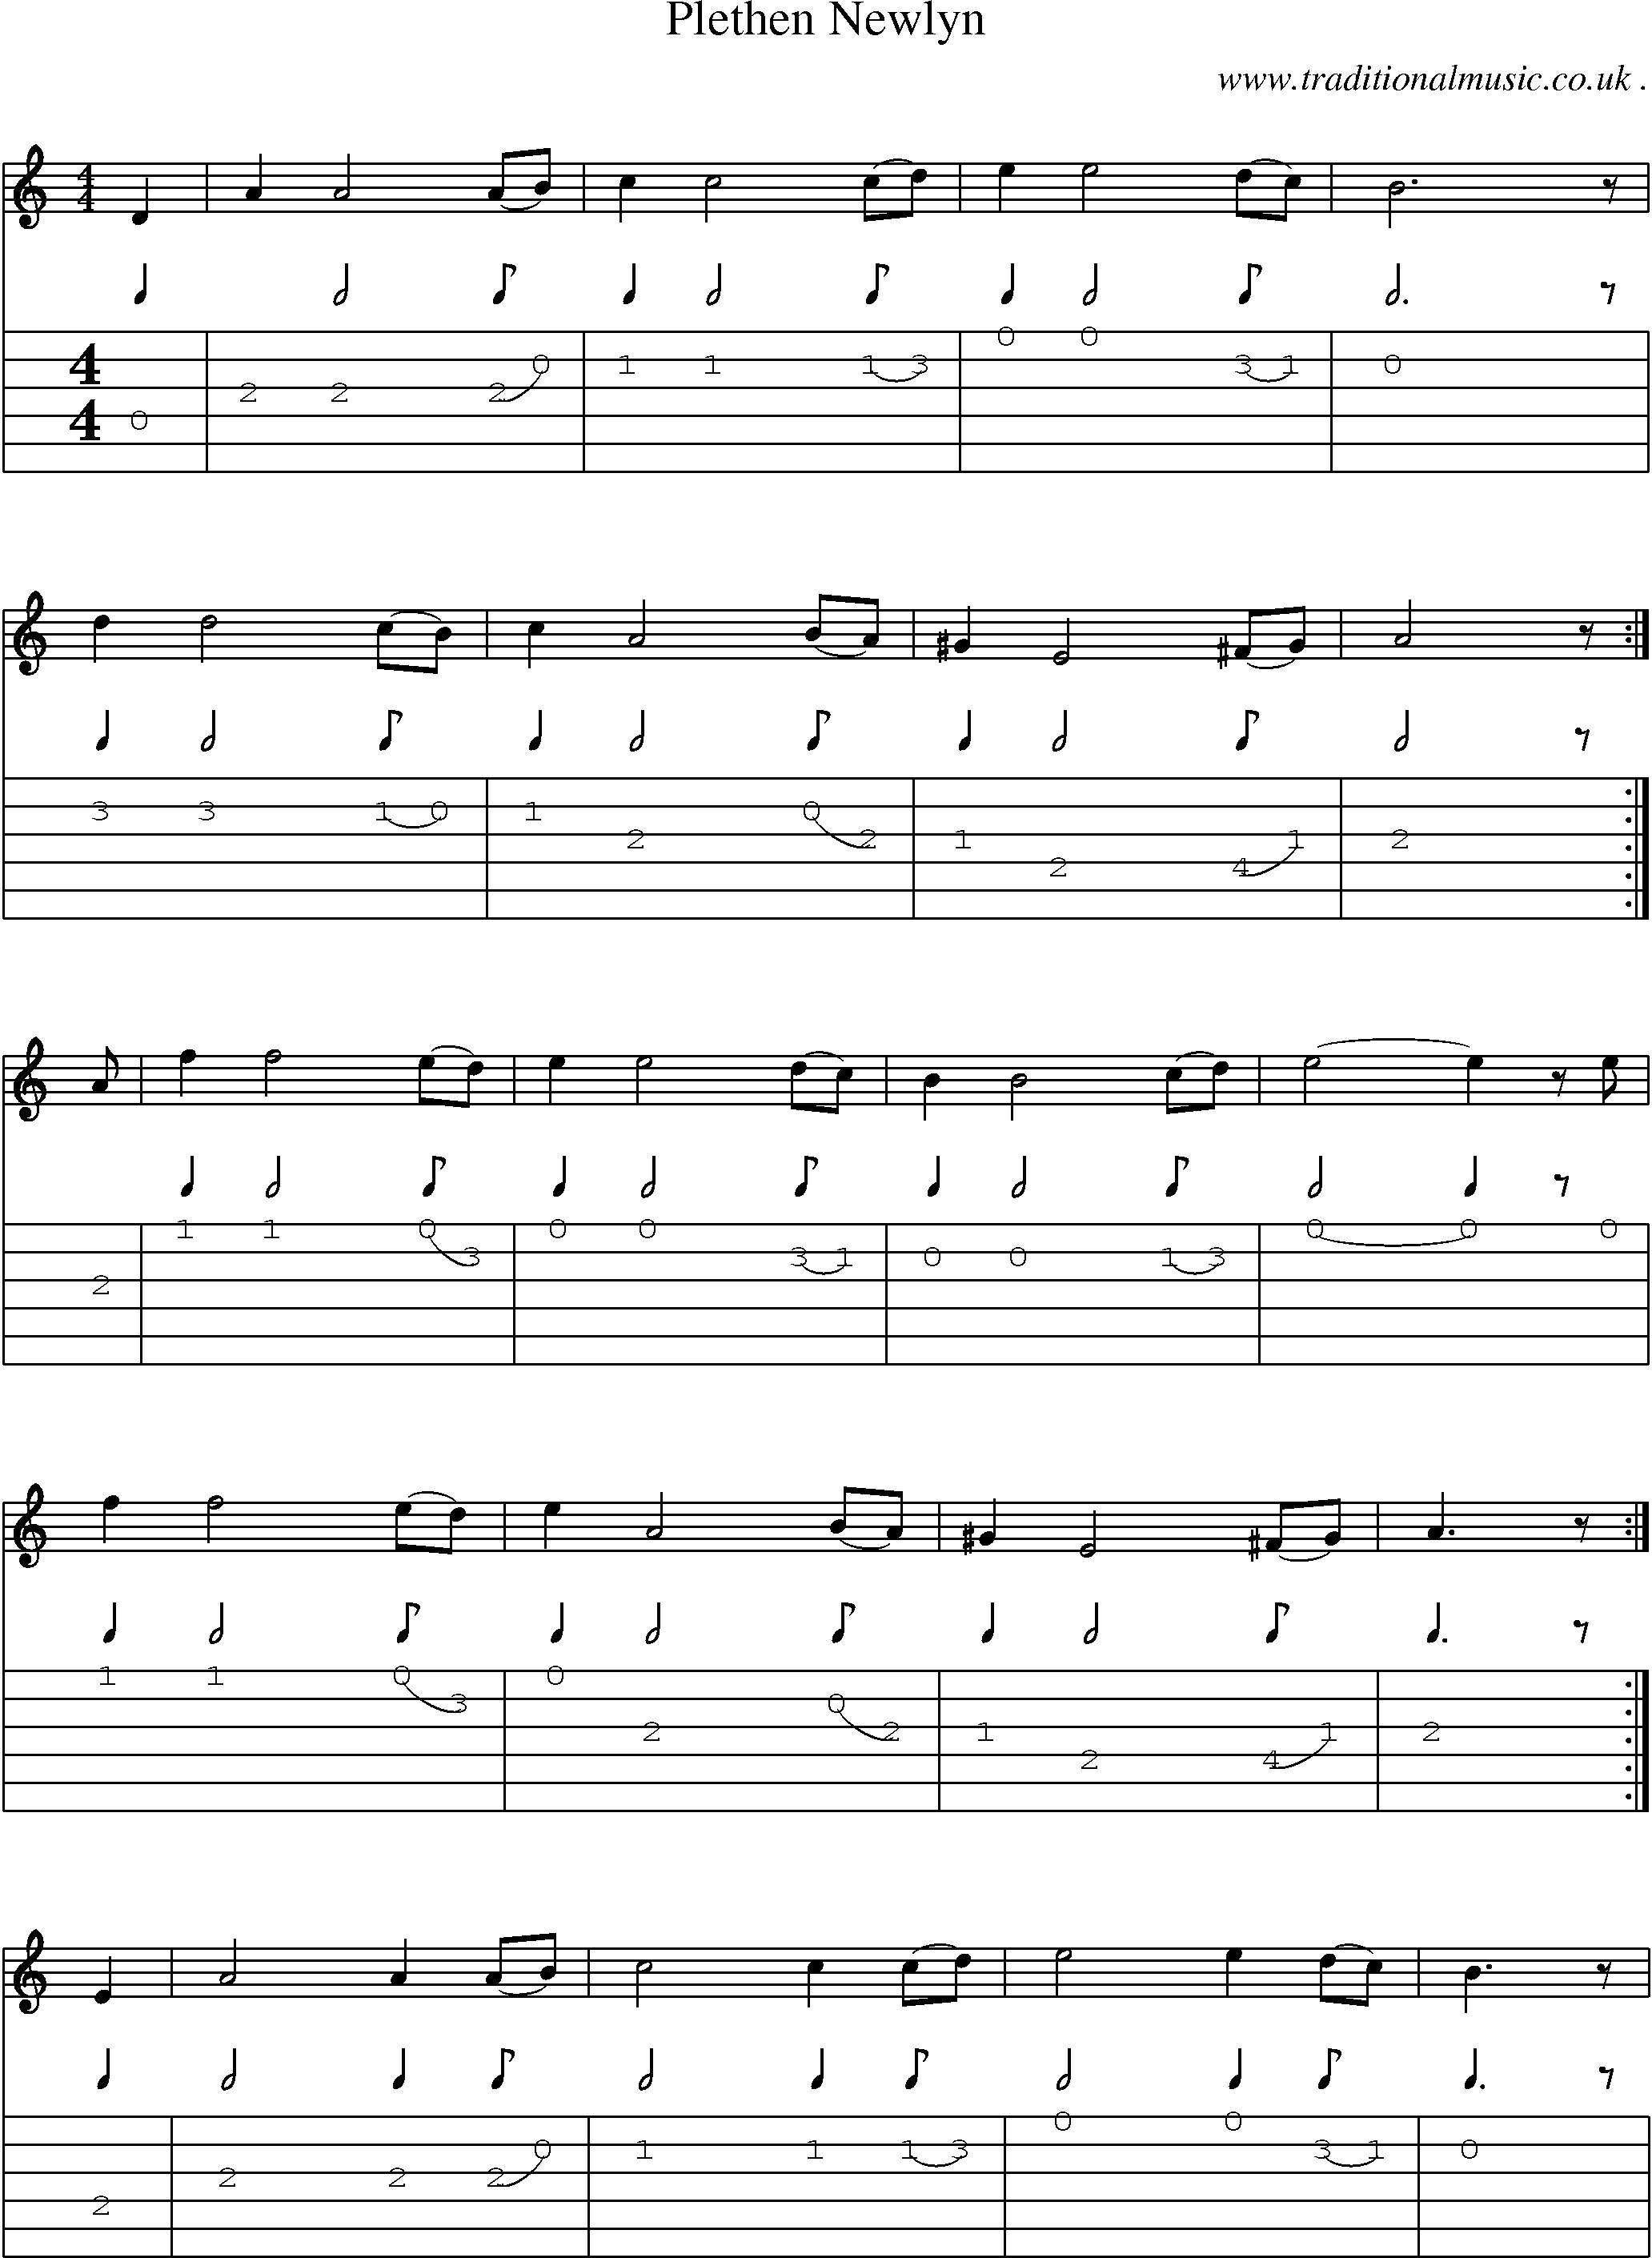 Sheet-Music and Guitar Tabs for Plethen Newlyn